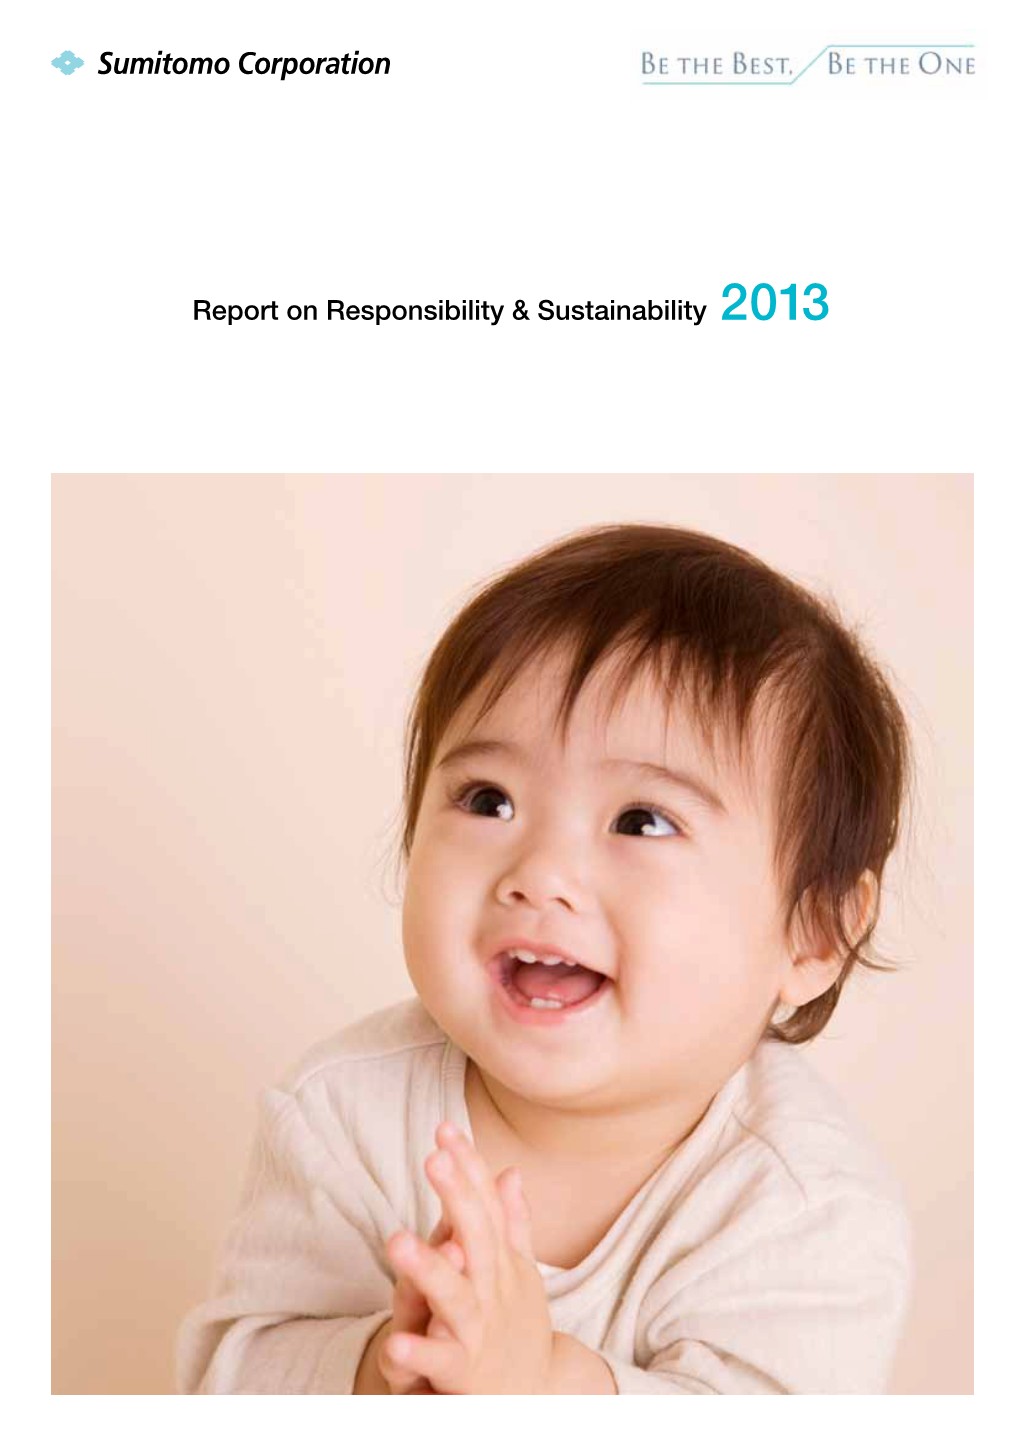 Report on Responsibility & Sustainability 2013